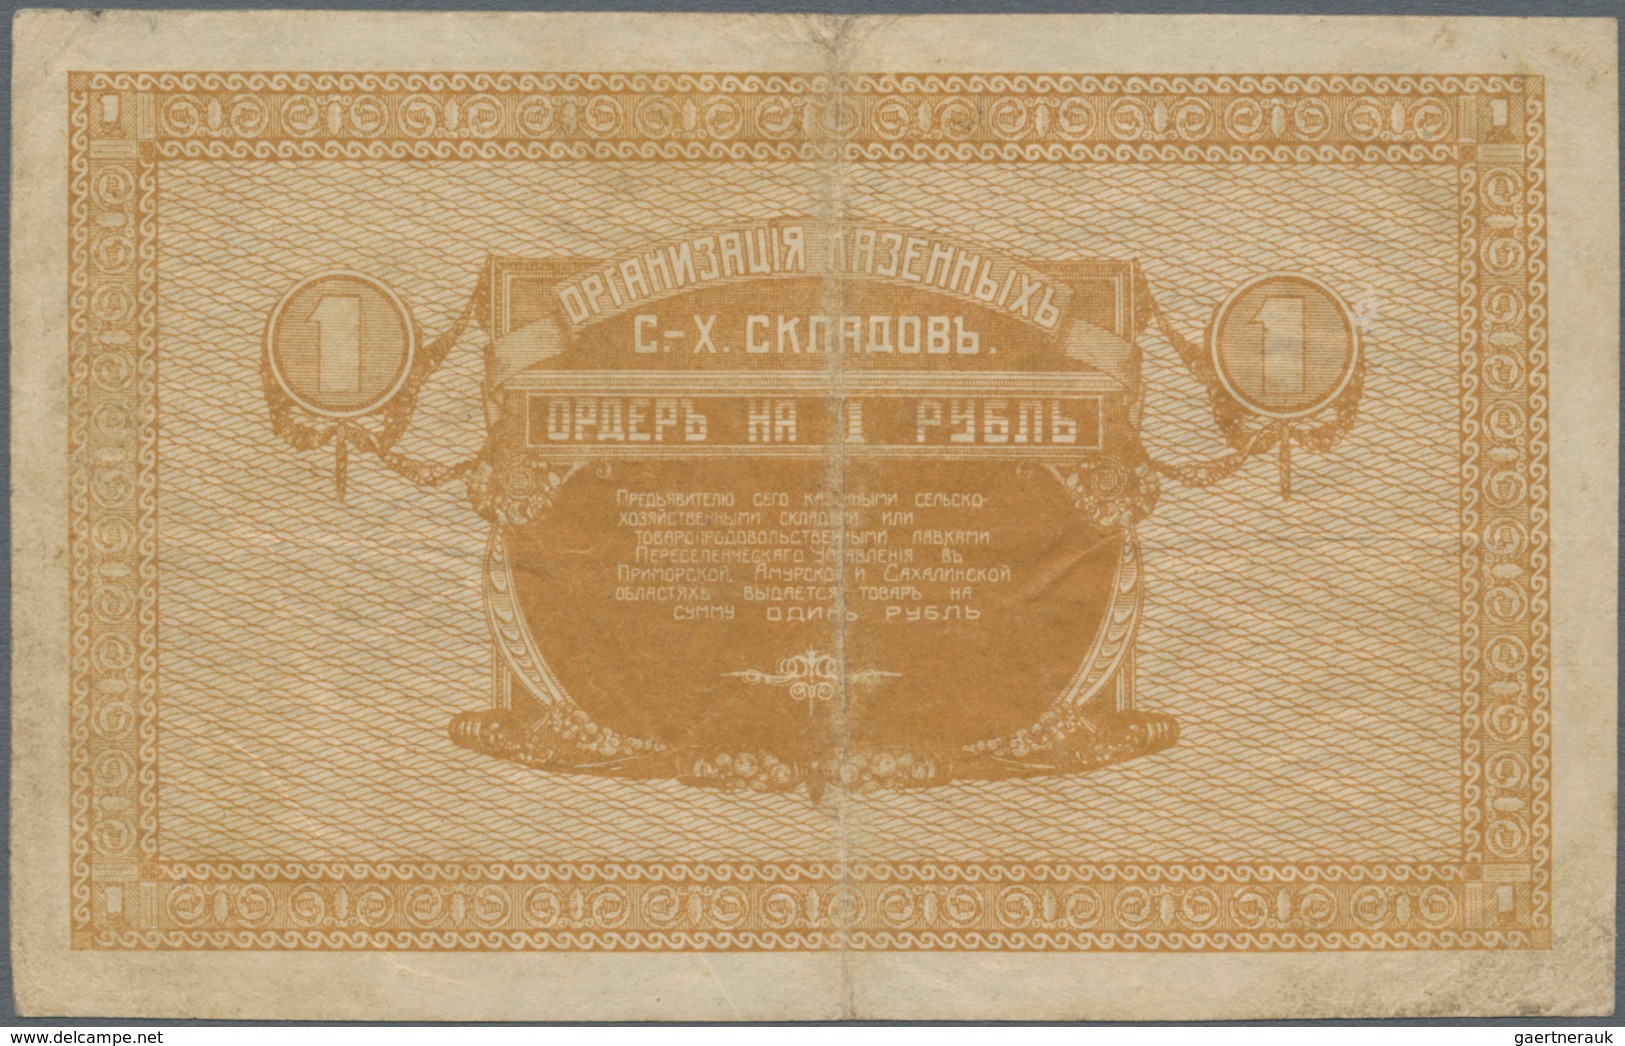 Russia / Russland: East Siberia - Primorye Region set with 5 banknotes 1, 3, 10, 20 and 100 Rubles N